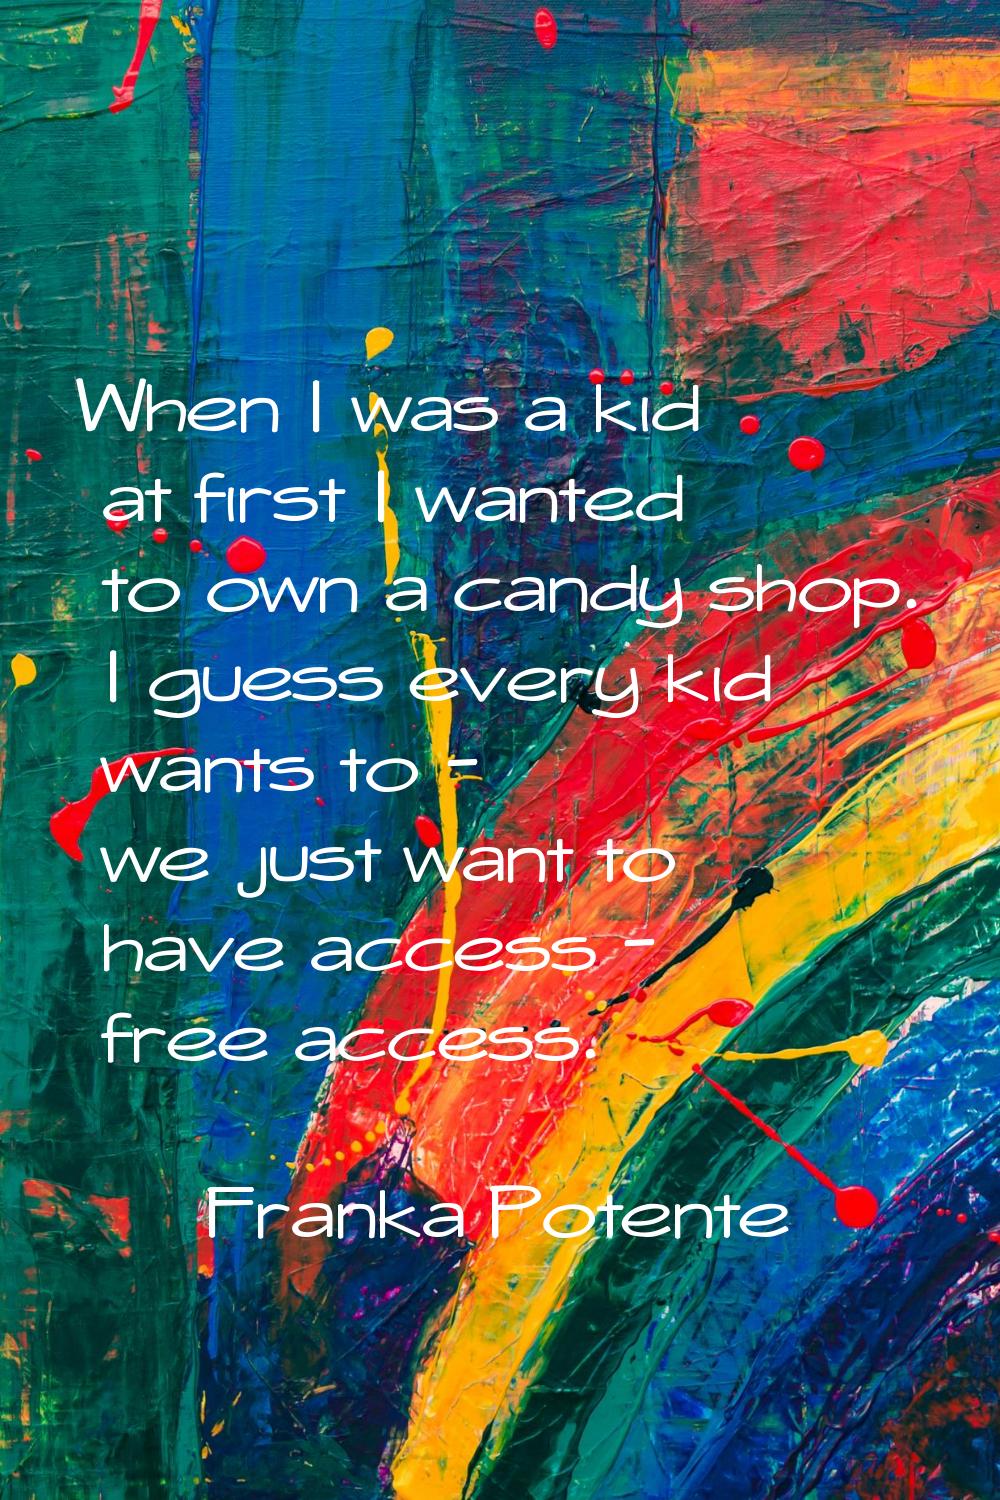 When I was a kid at first I wanted to own a candy shop. I guess every kid wants to - we just want t